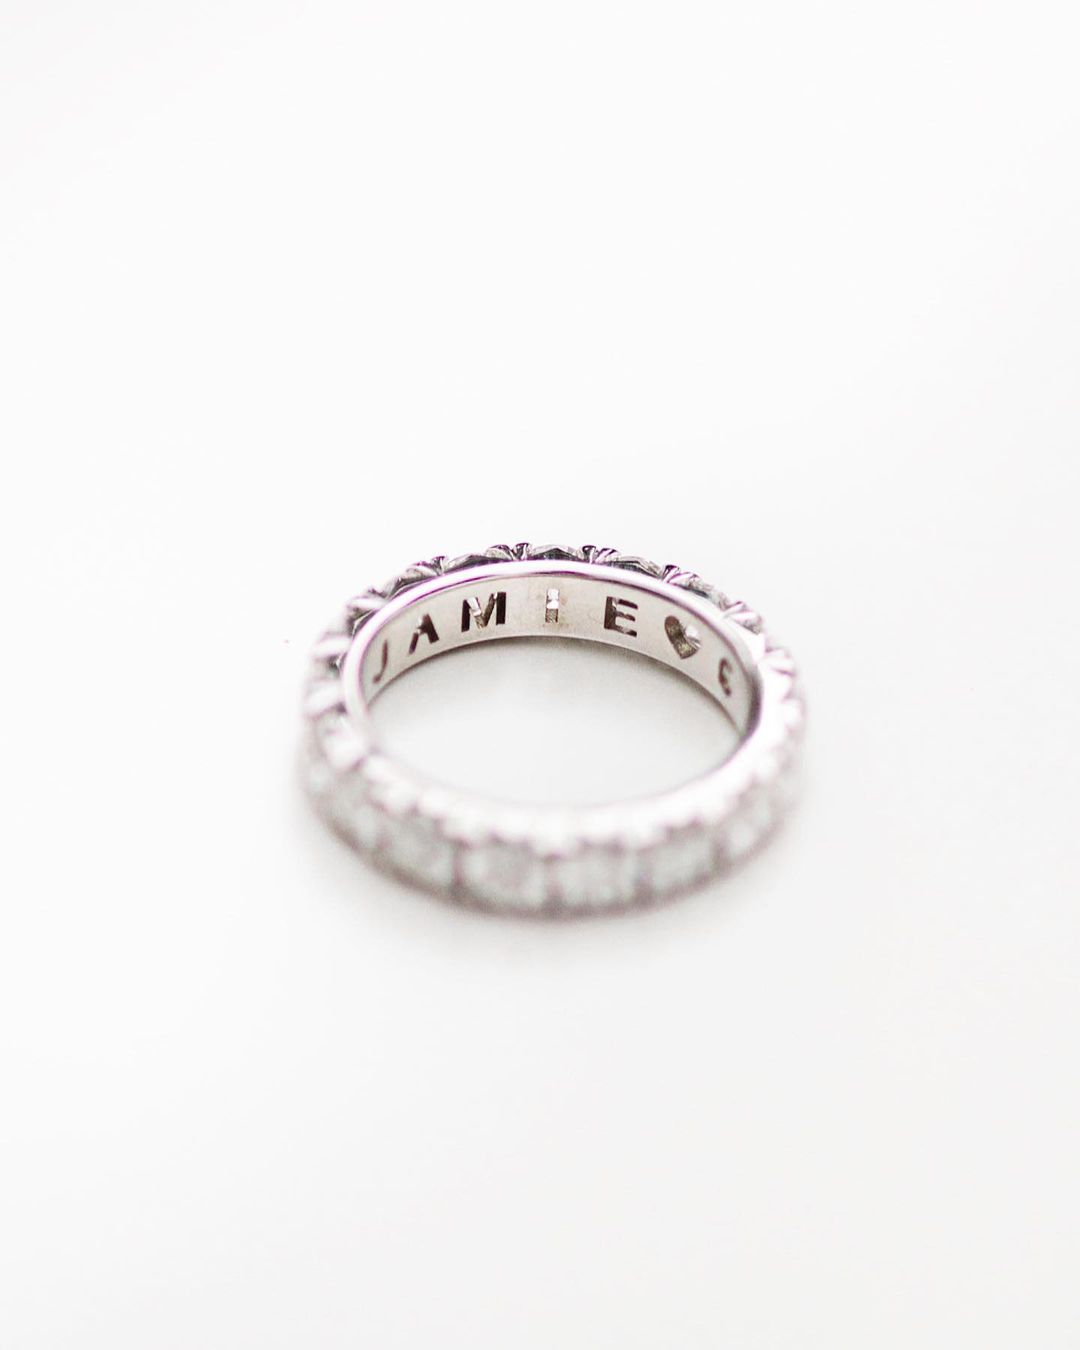 Custom ring Engraving - Please add this listing if you want engraving on the ring